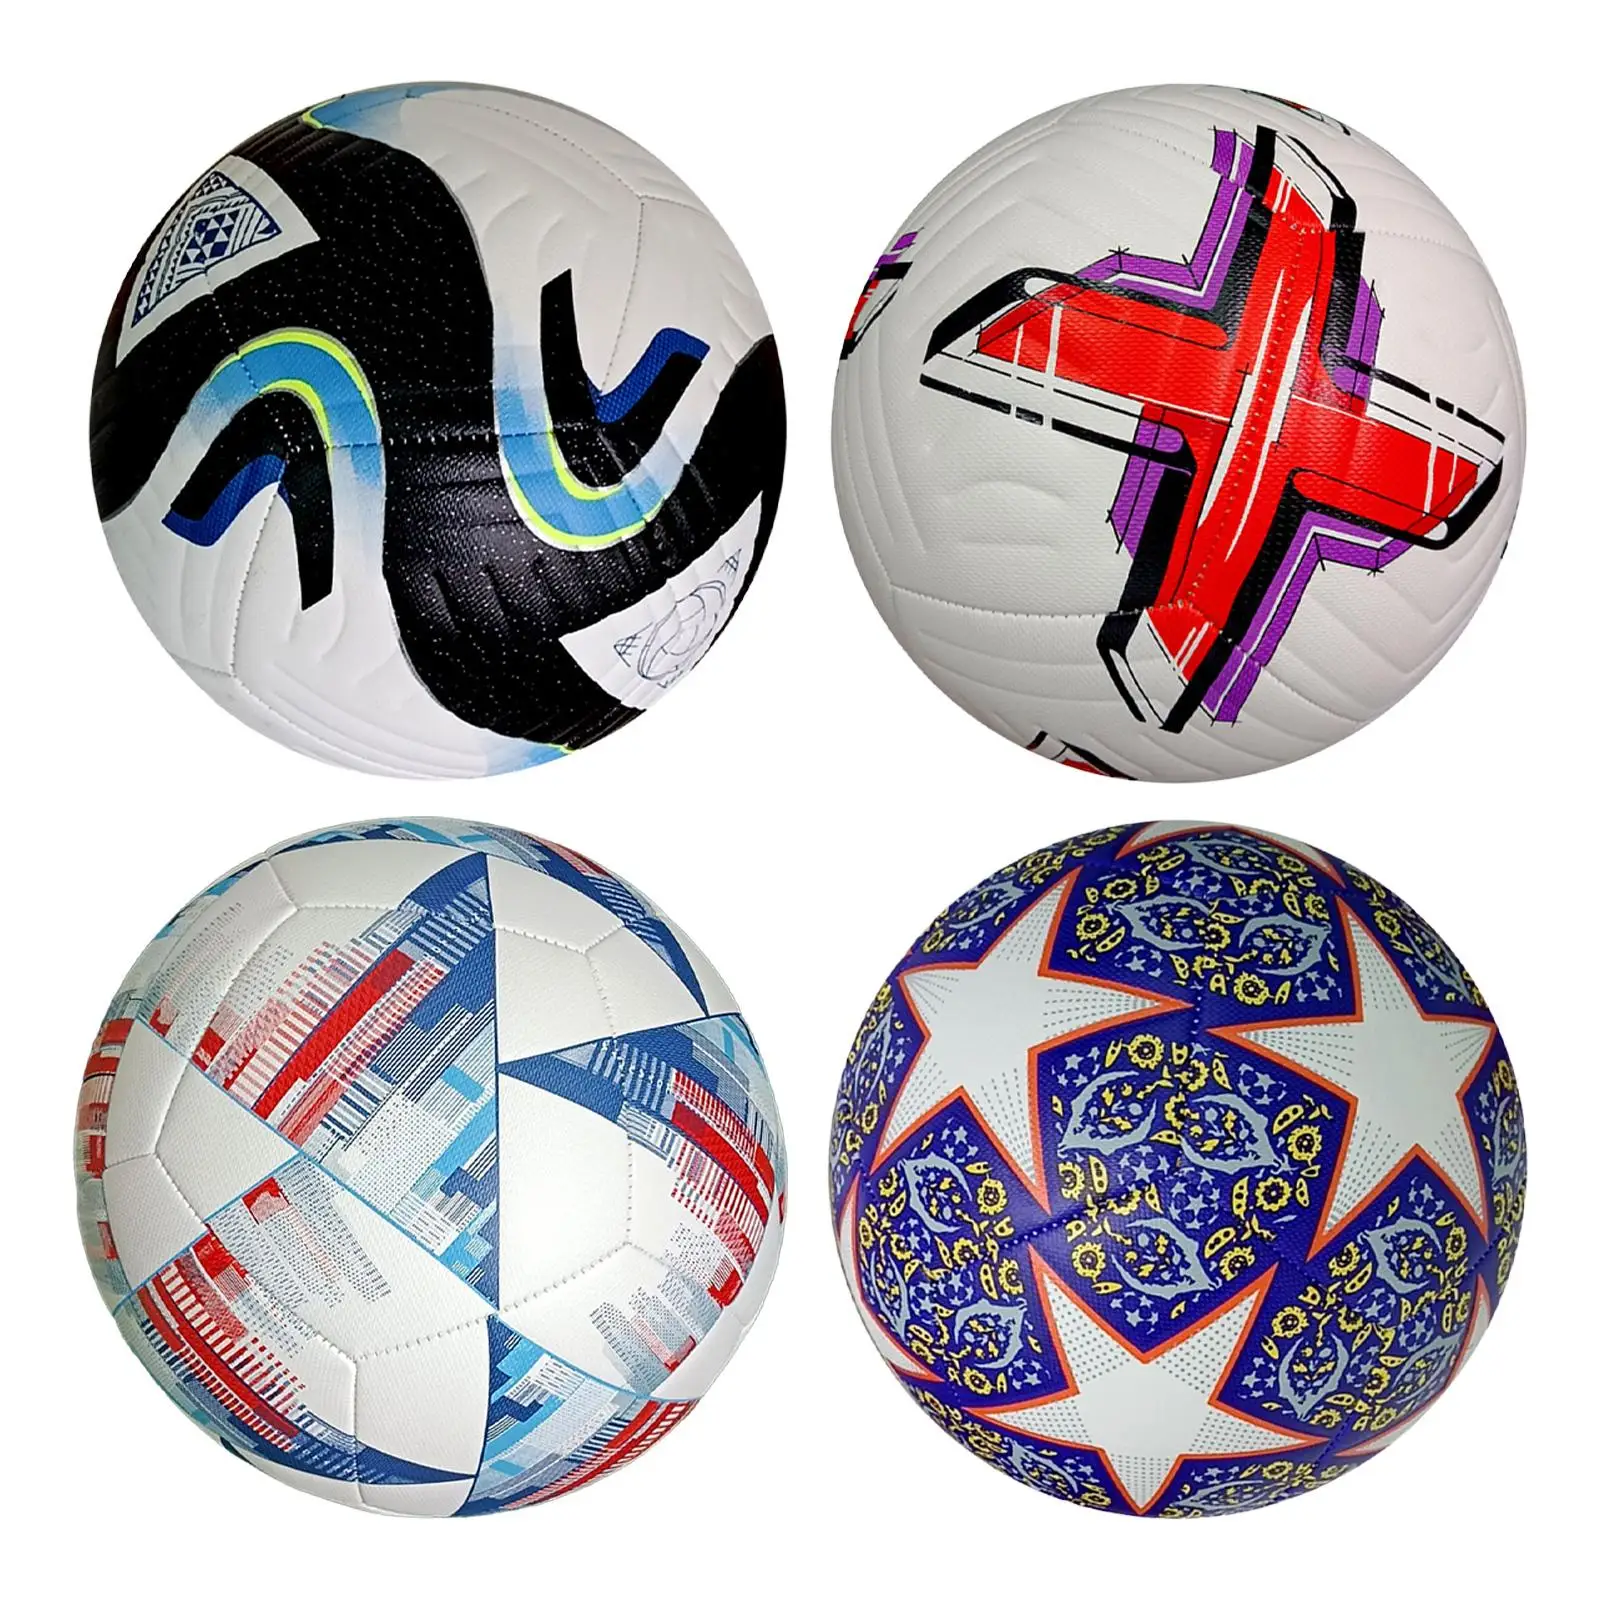 Soccer Ball Size 5 Lightweight Soccer Training Equipment Ball Sports Ball Official Match Ball for Game Club Practice Kids Gifts